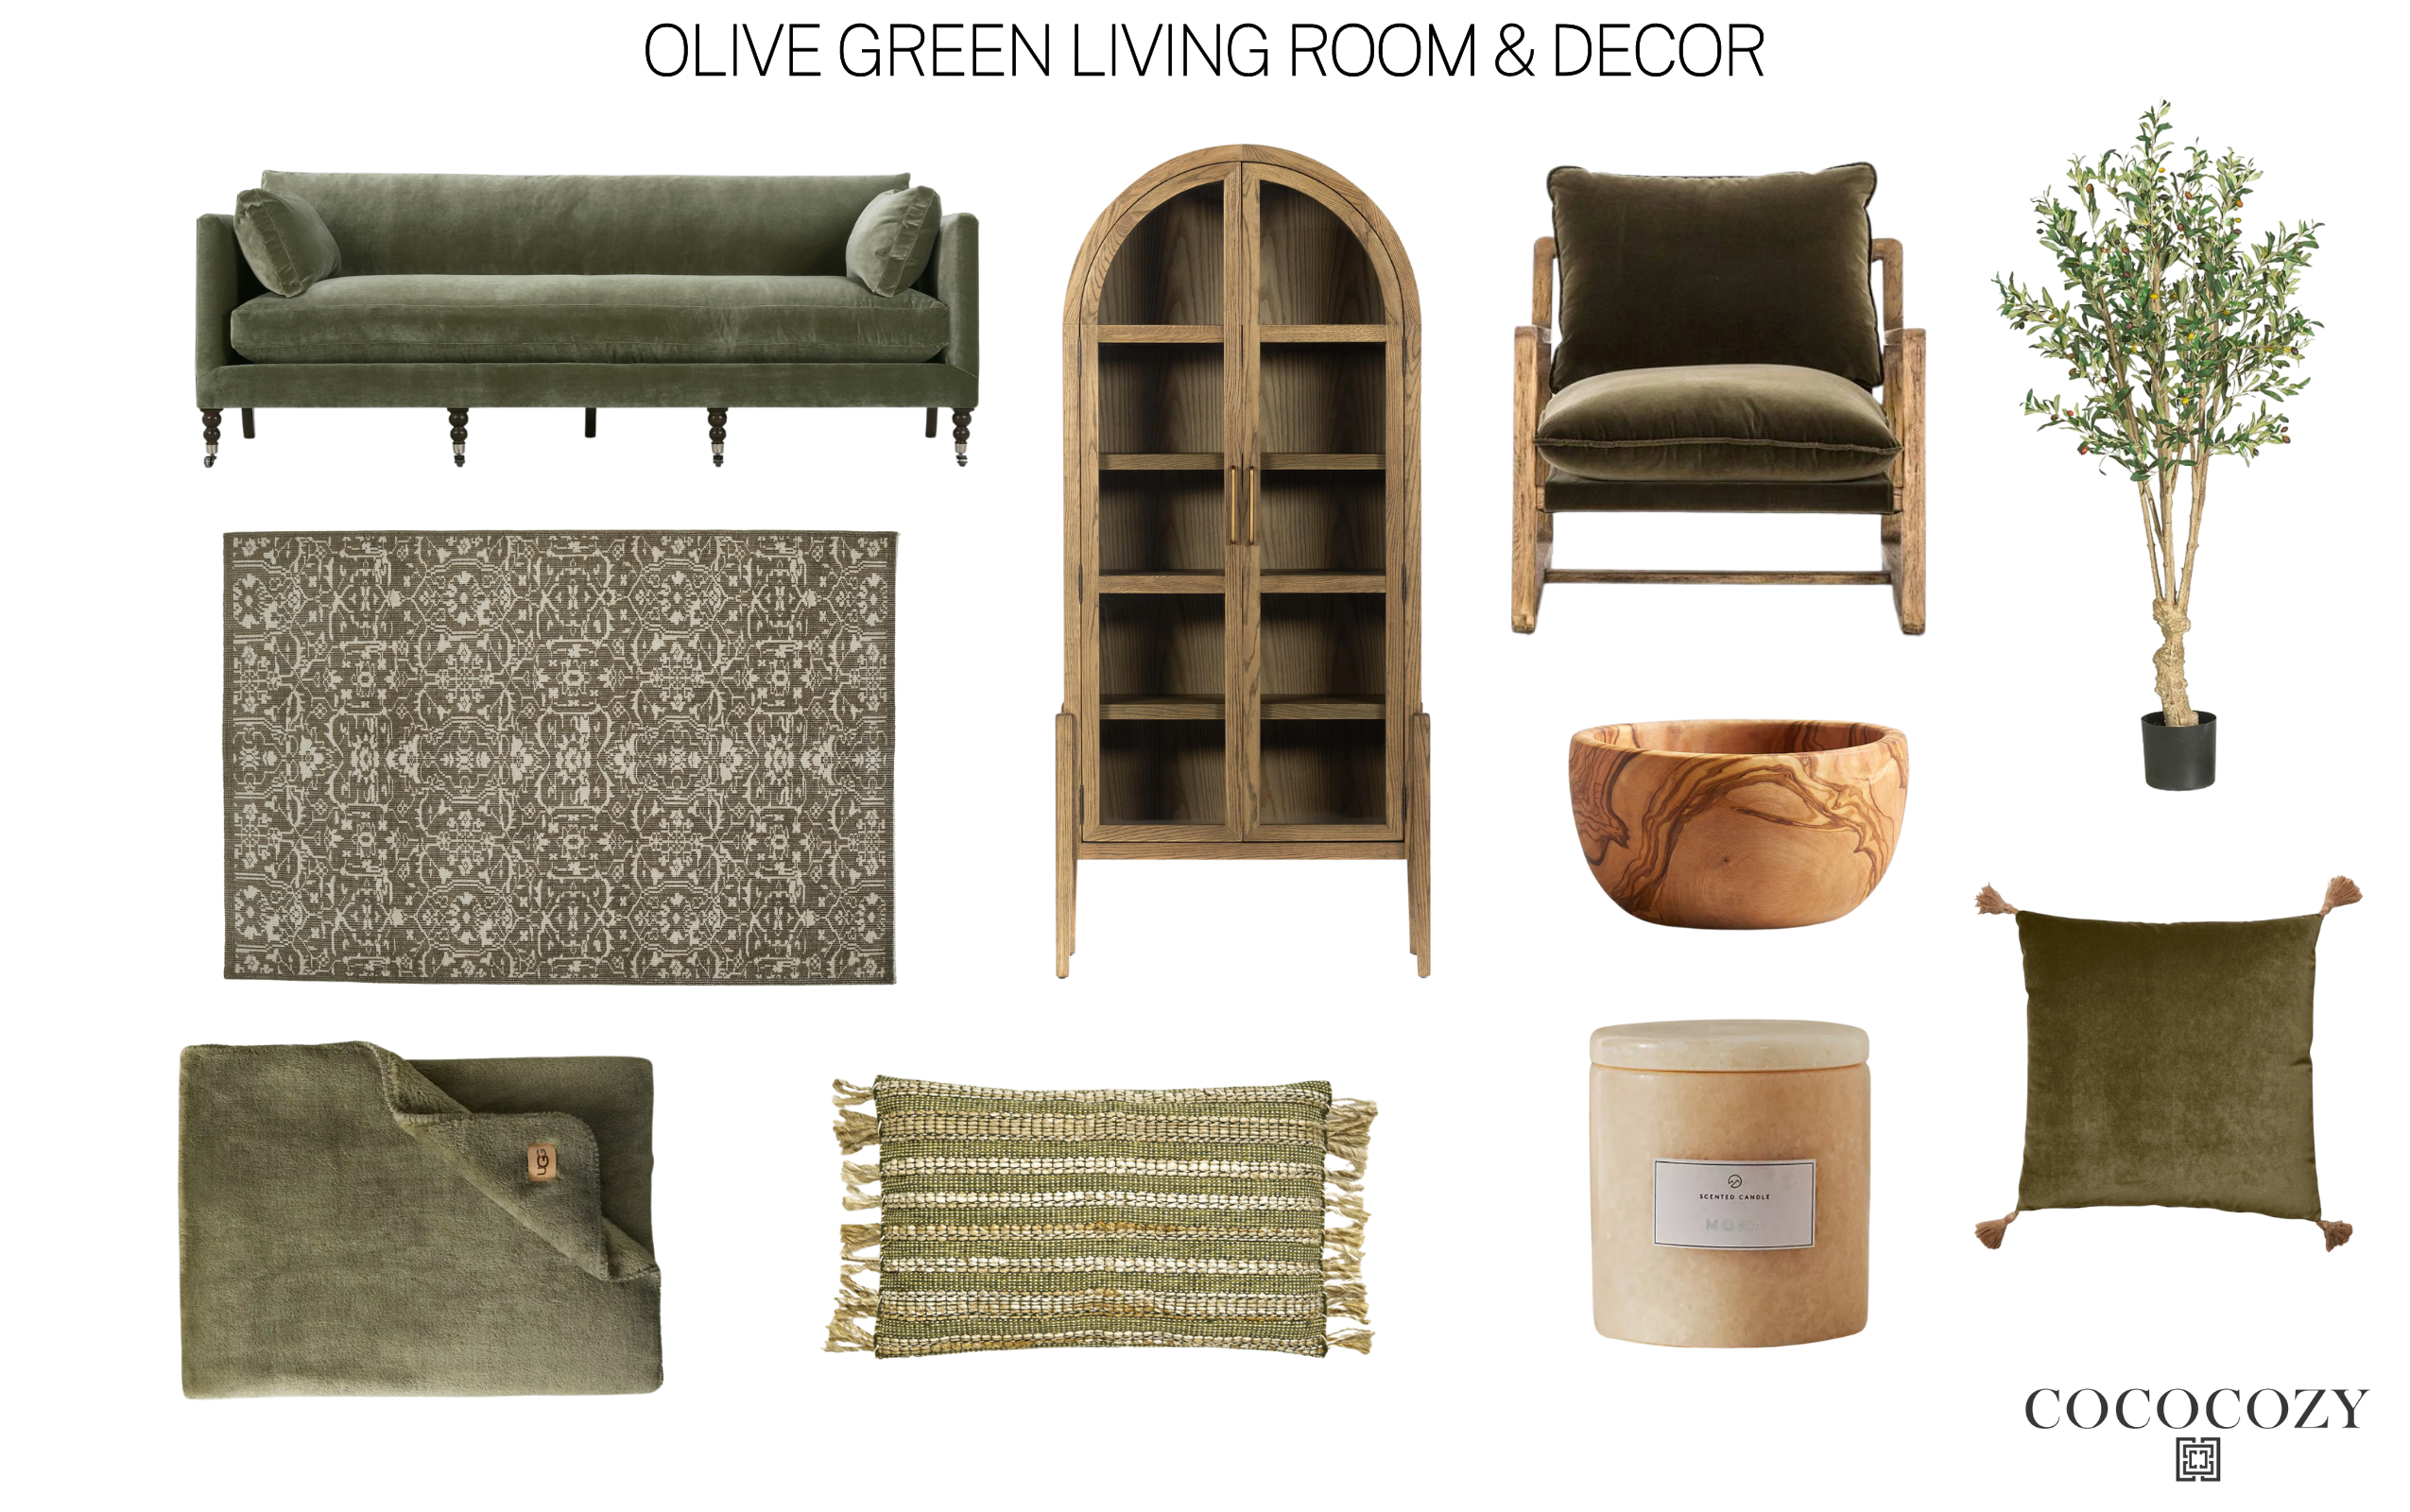 Alt tag for COCOCOZY olive green living room